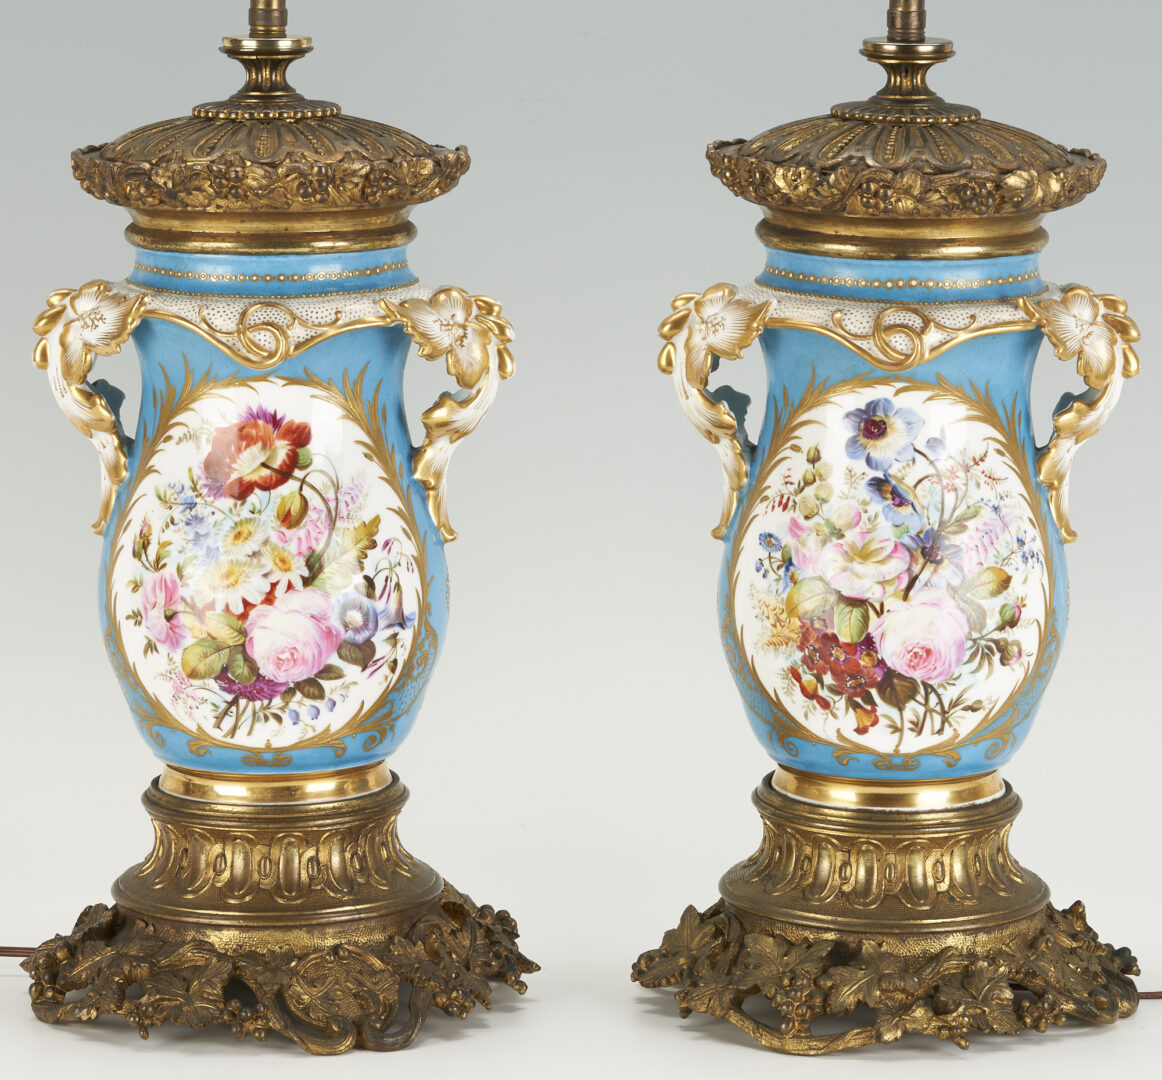 Lot 225: Pair of Sevres Style Porcelain Urns, Mounted as Lamps